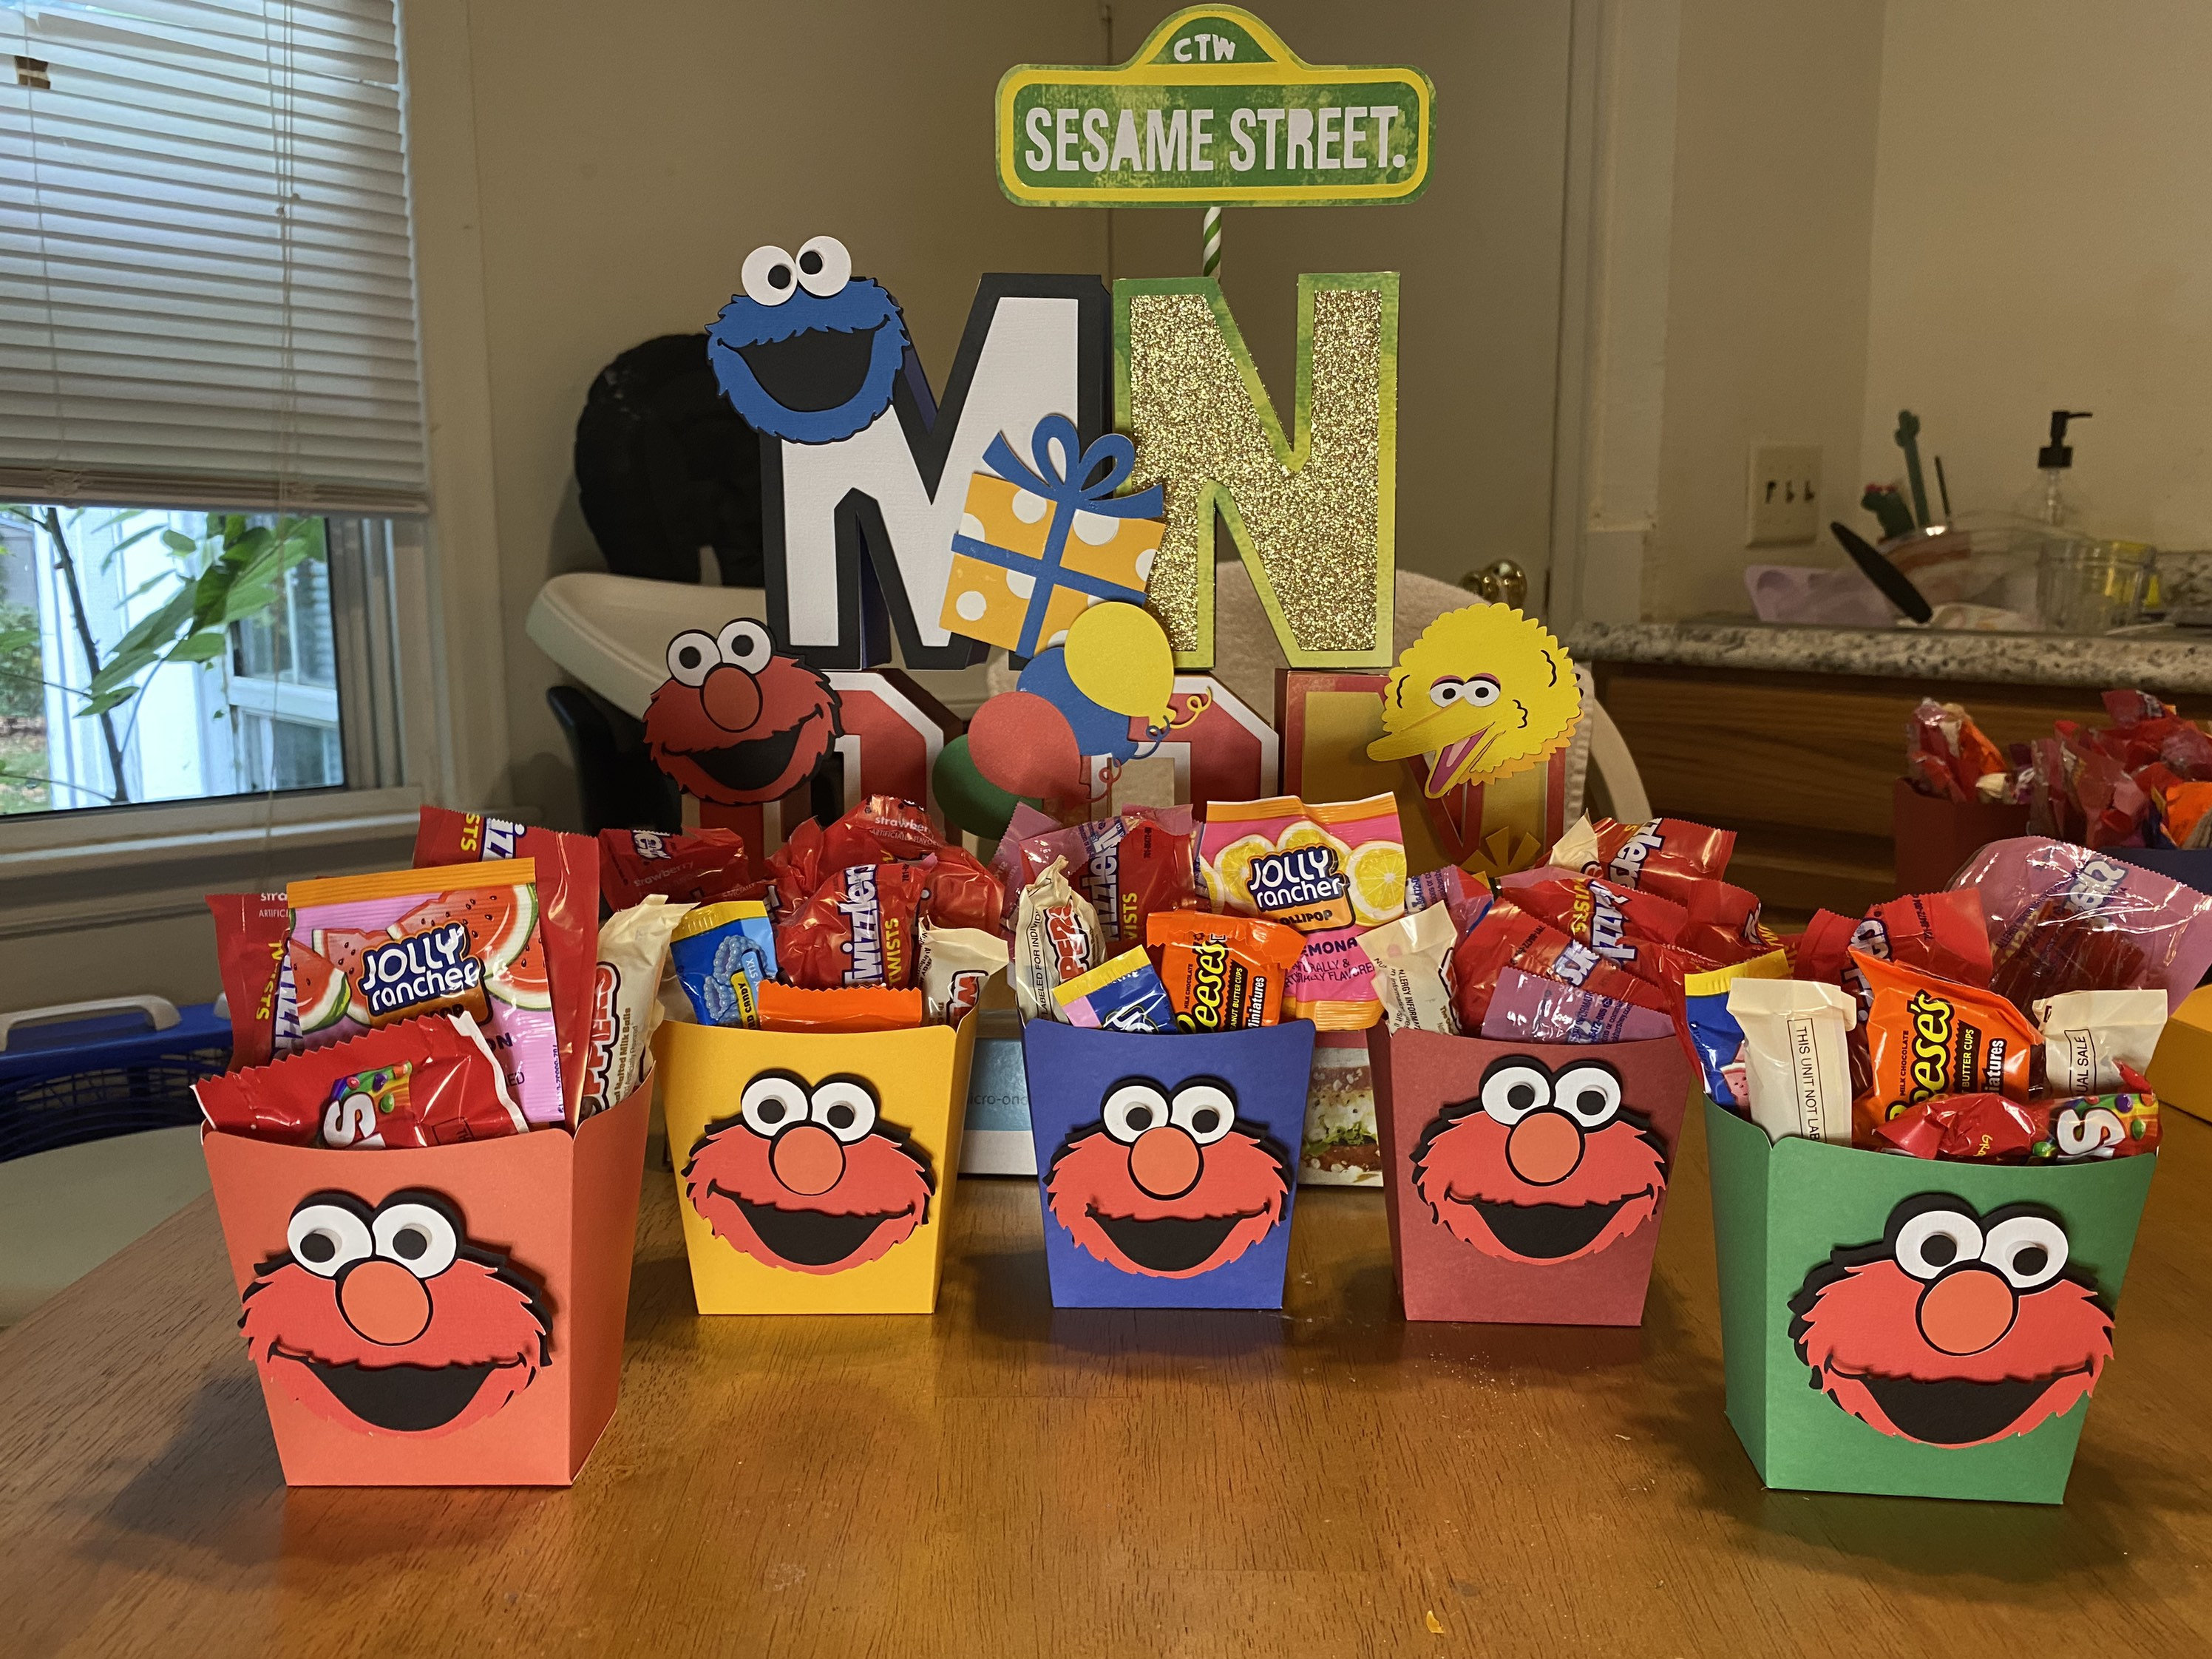 Make your own goodie bag. Kids can decorate party bags with sesame street  stickers/characters and f…